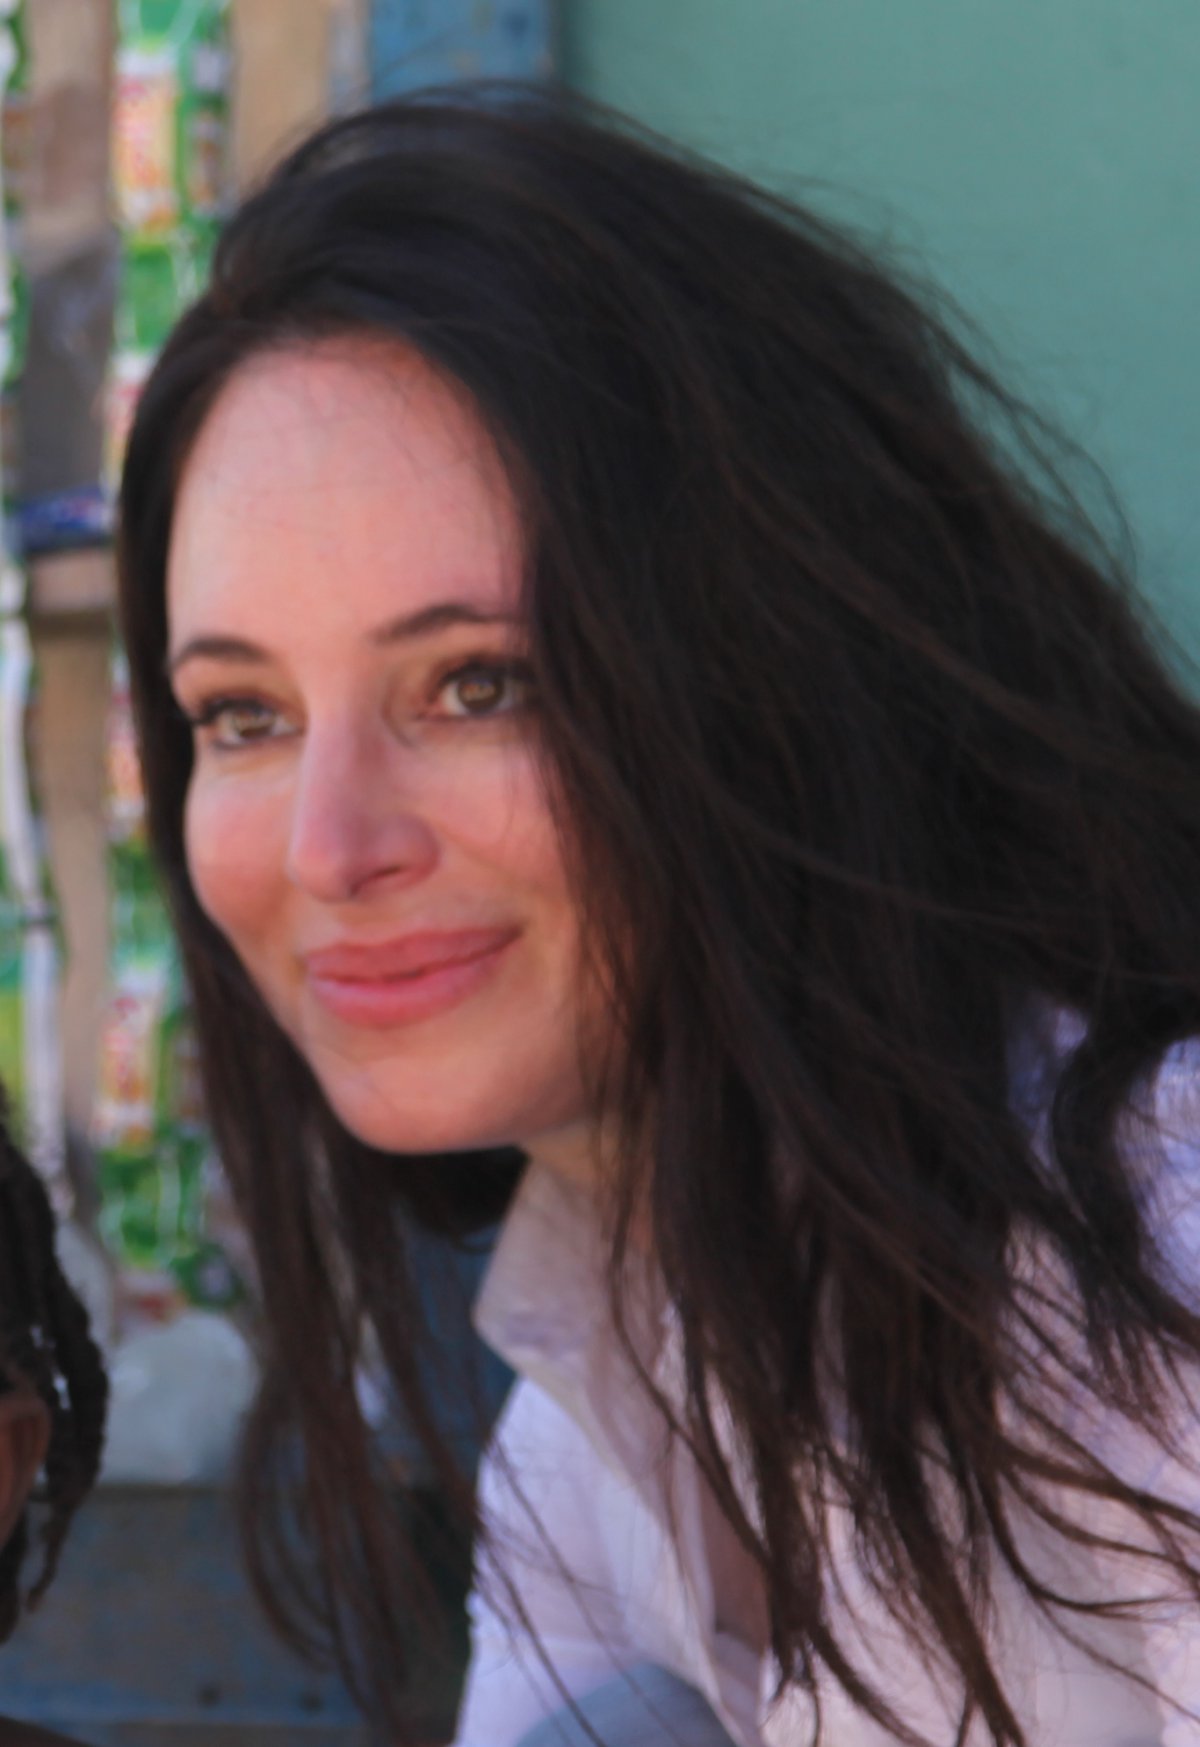 Madeleine Stowe awarded protective order against alleged 